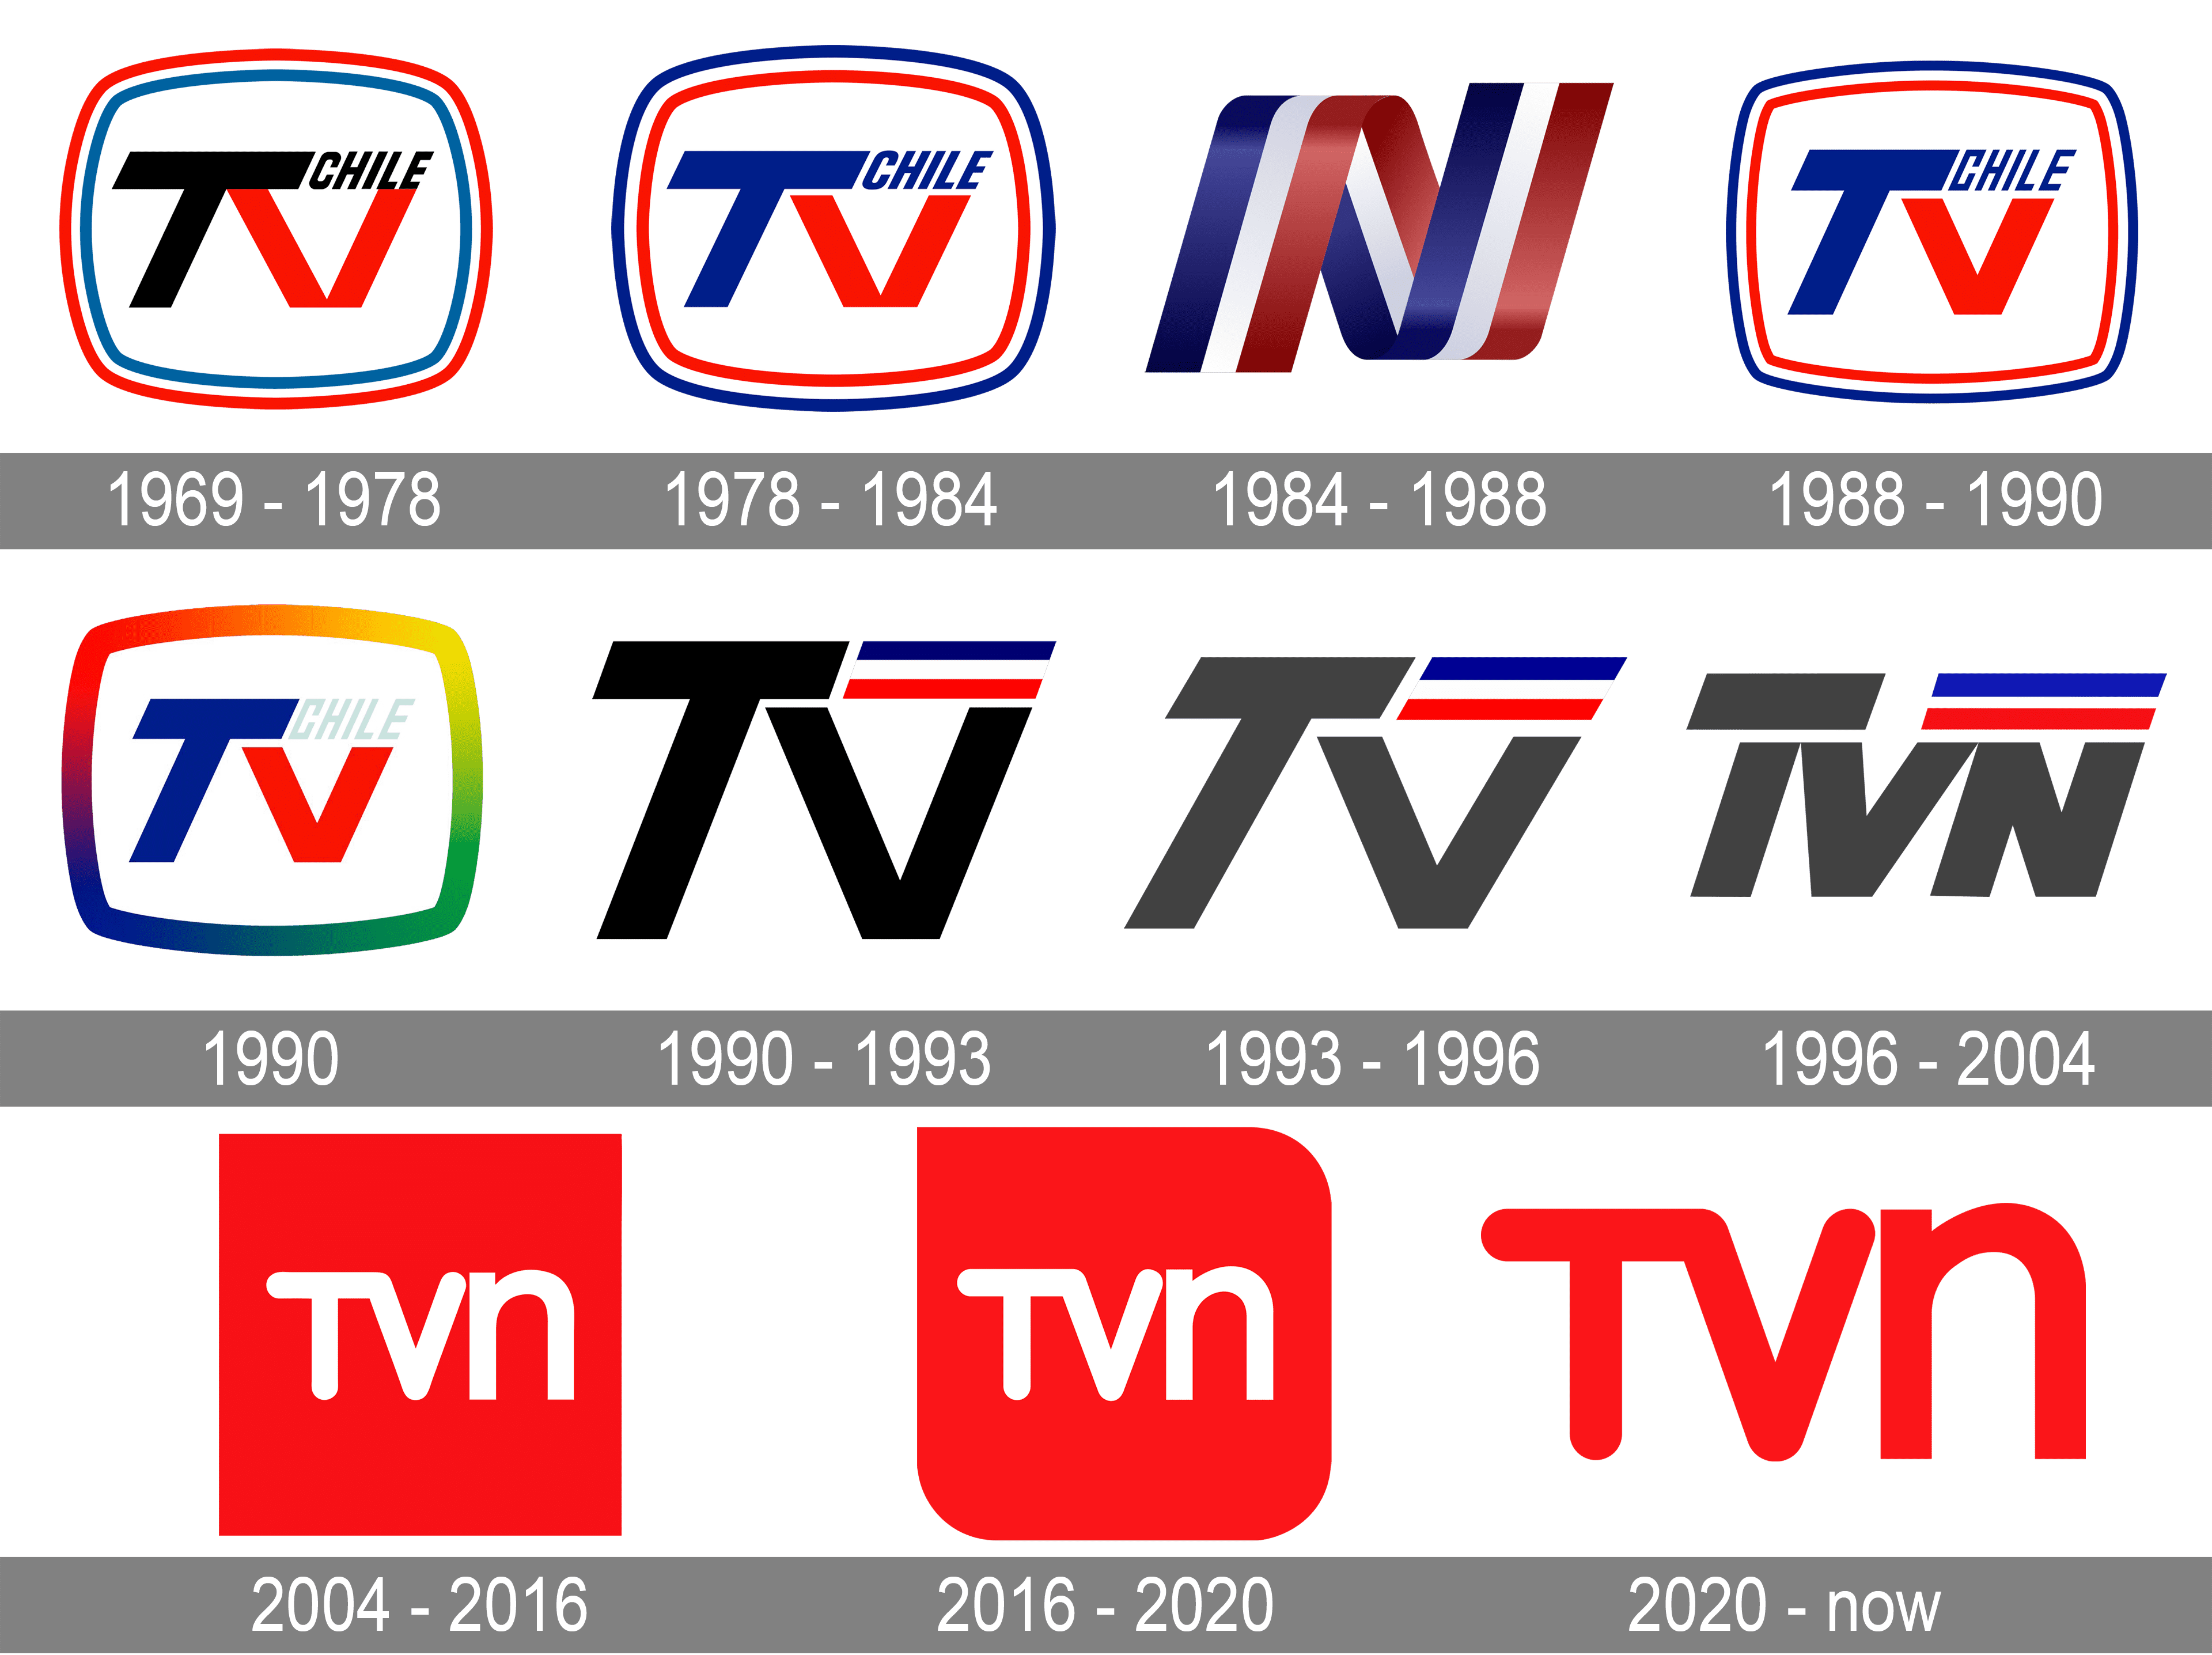 tvn-chile-logo-and-symbol-meaning-history-png-brand